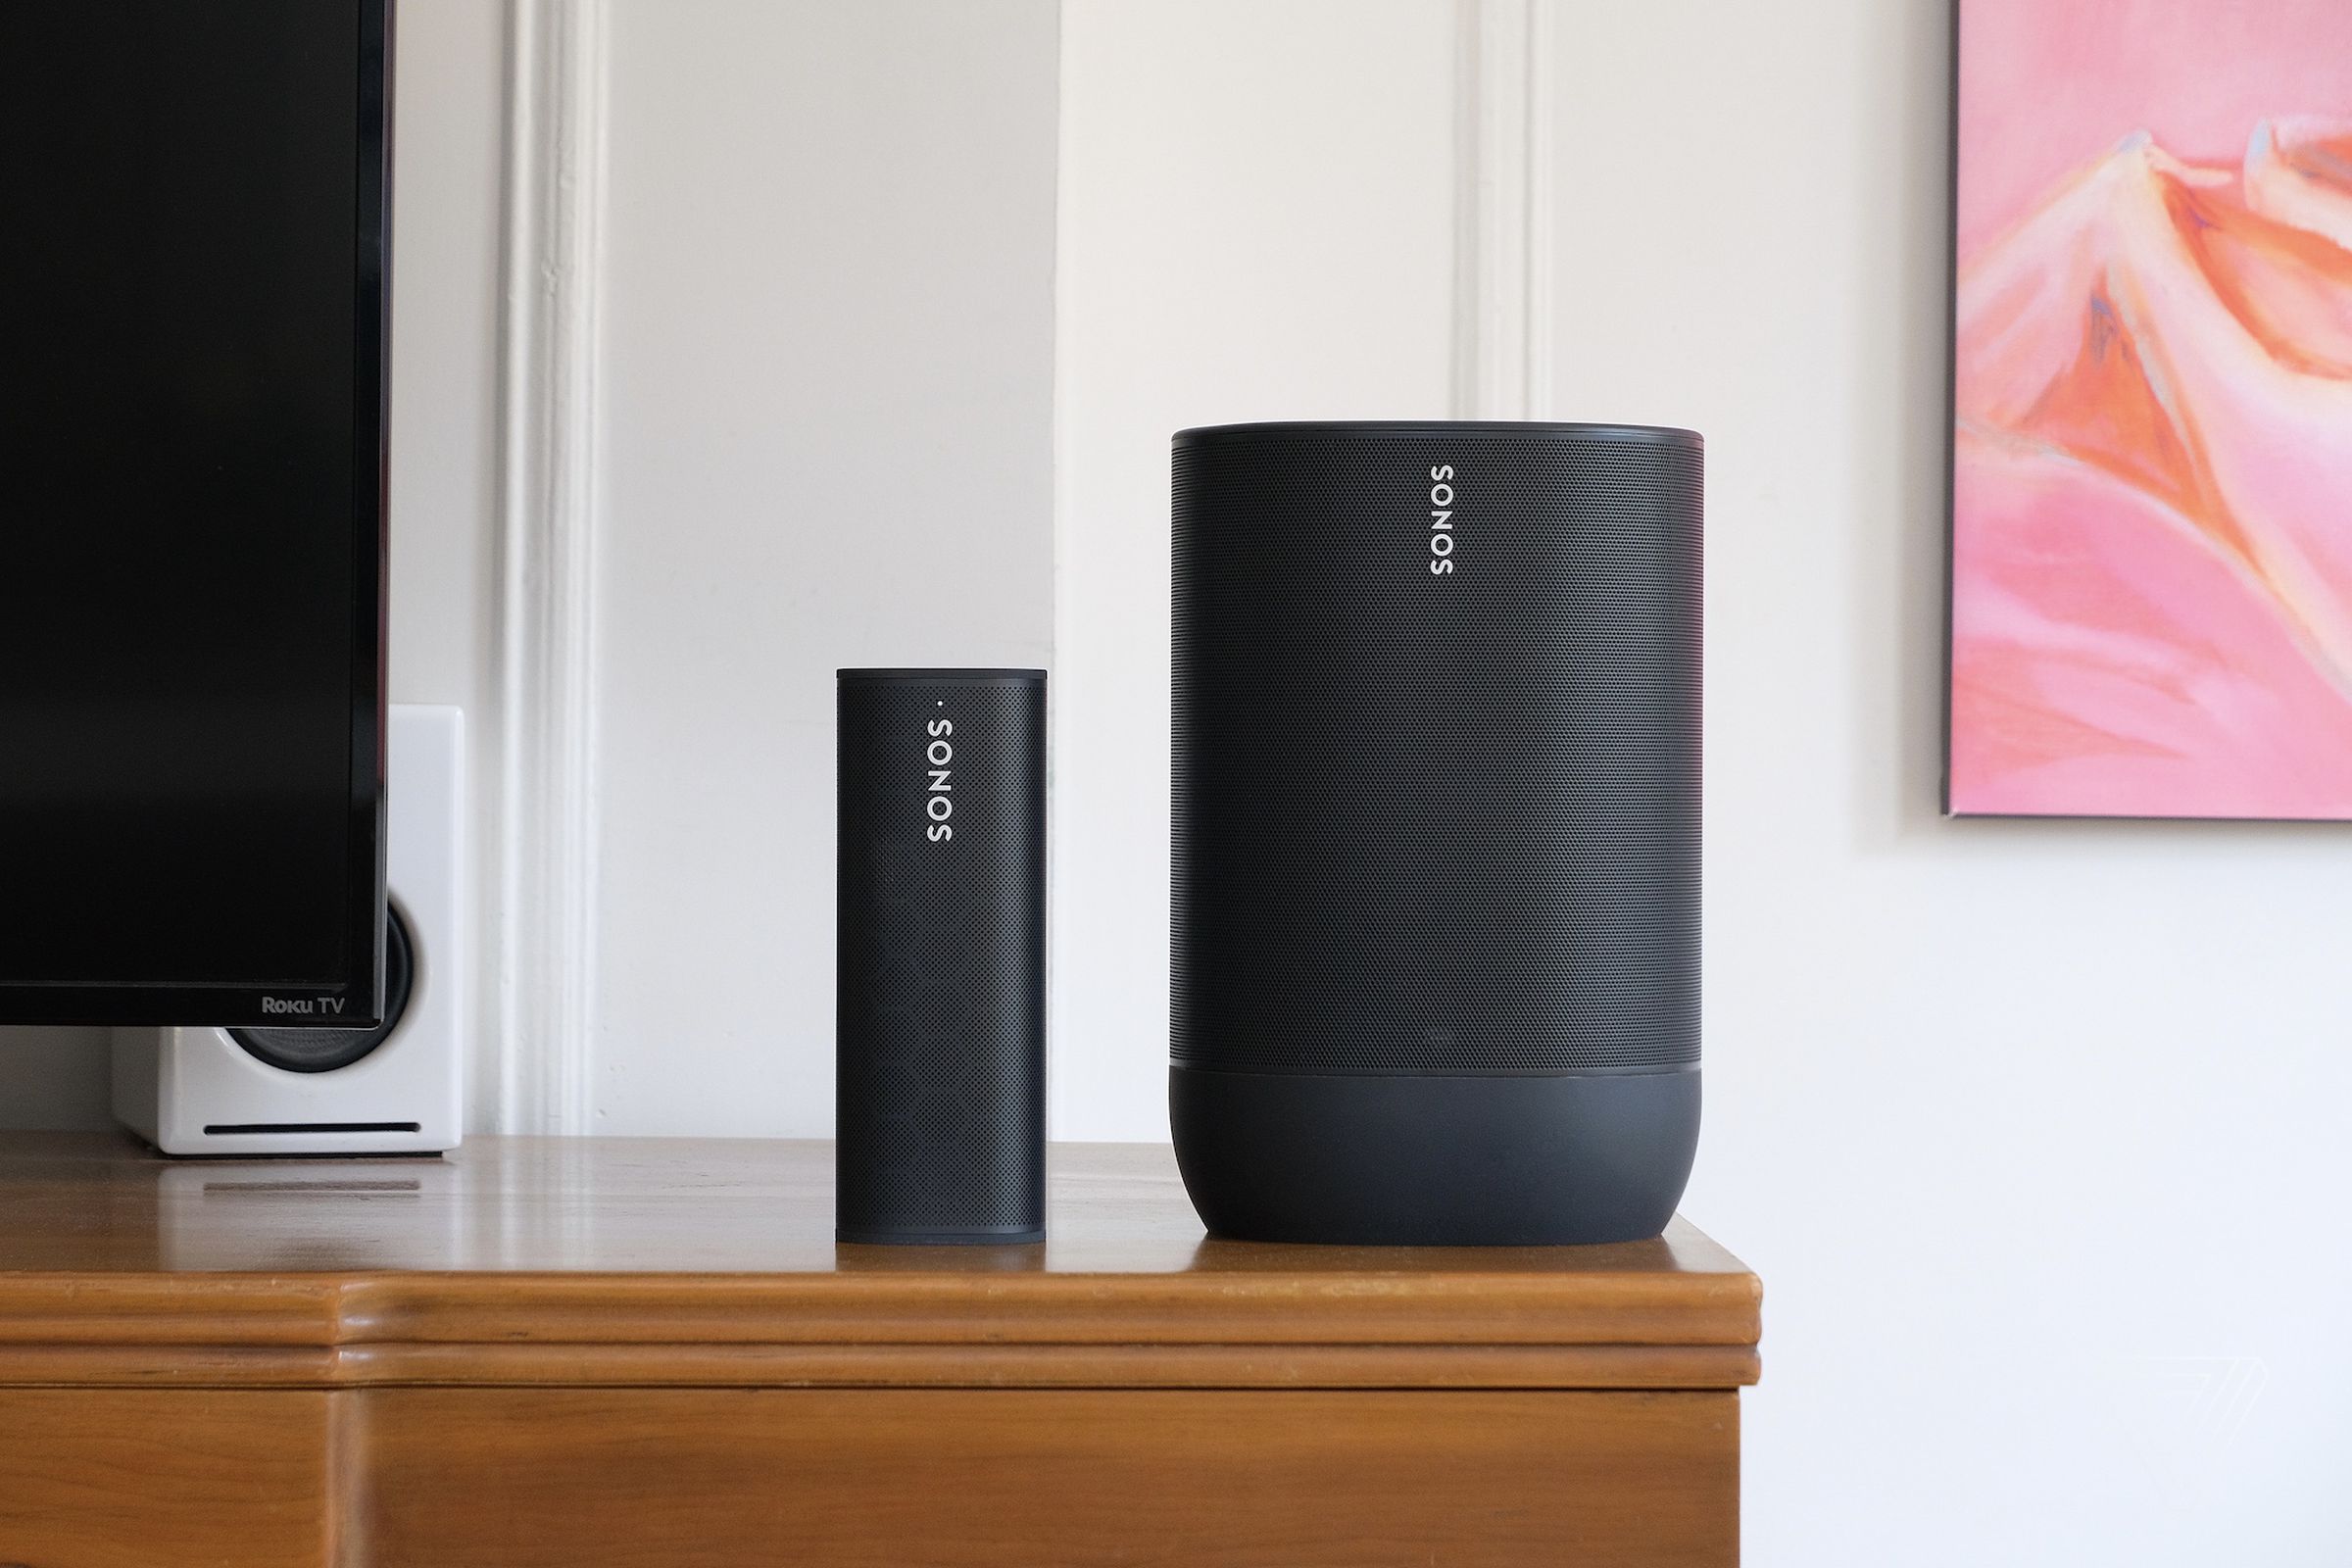 An image of the Sonos Roam and Sonos Move side by side.